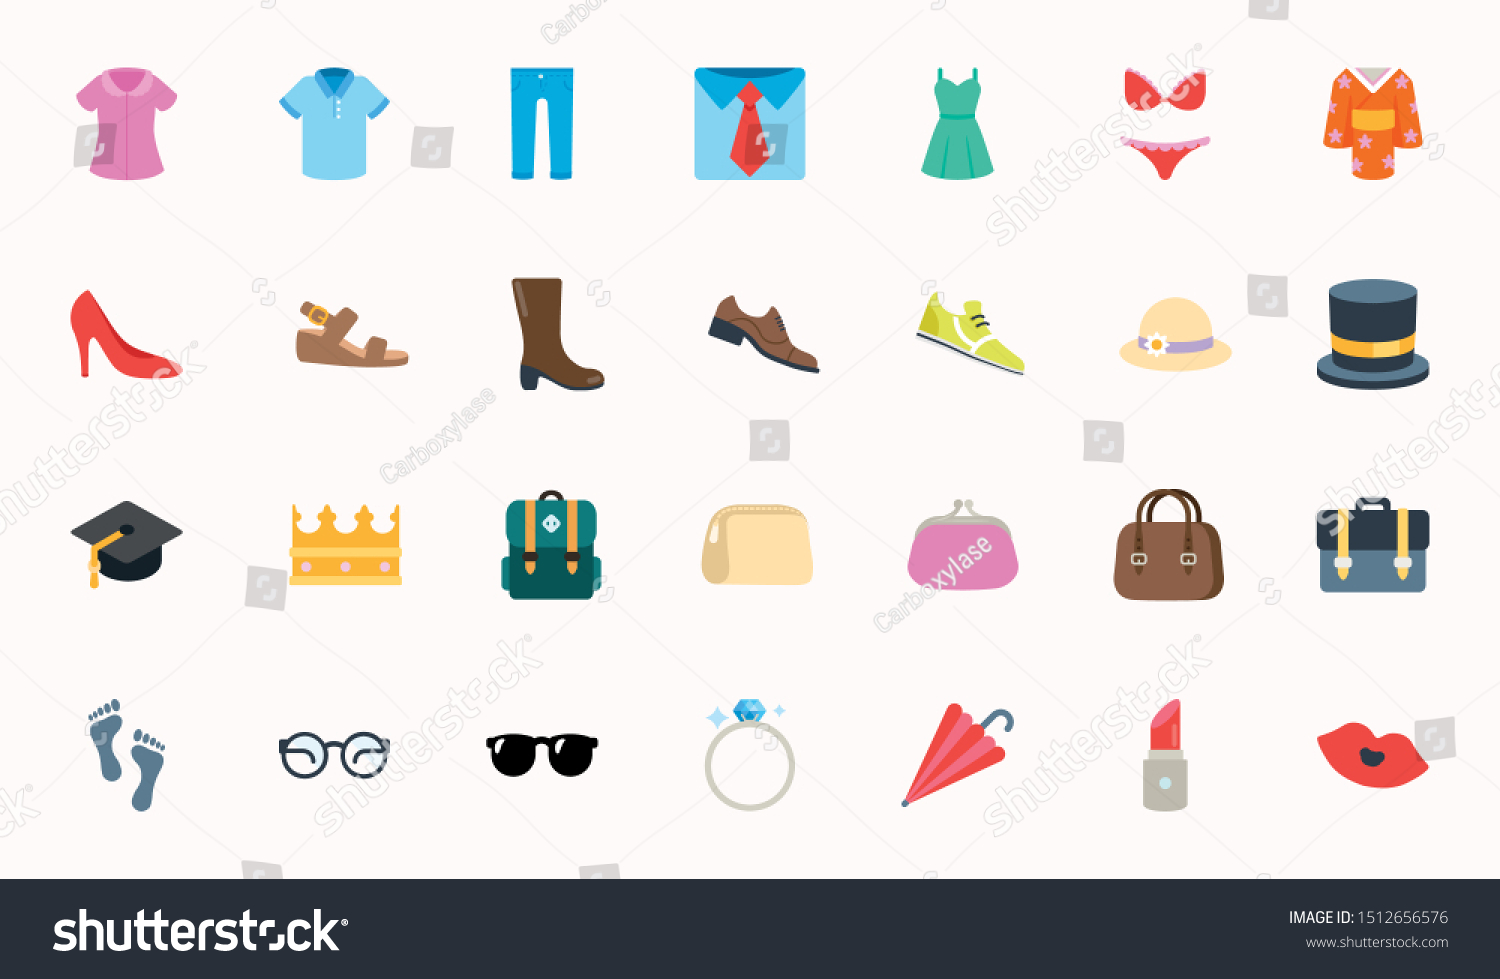 SVG of Fashion Clothes Vector Illustration Icons Set. Shopping Emojis Collection. Menswear, Womenswear, Accessories, Ring, Hat, Shirts, Wears, Apparels, Dresses svg